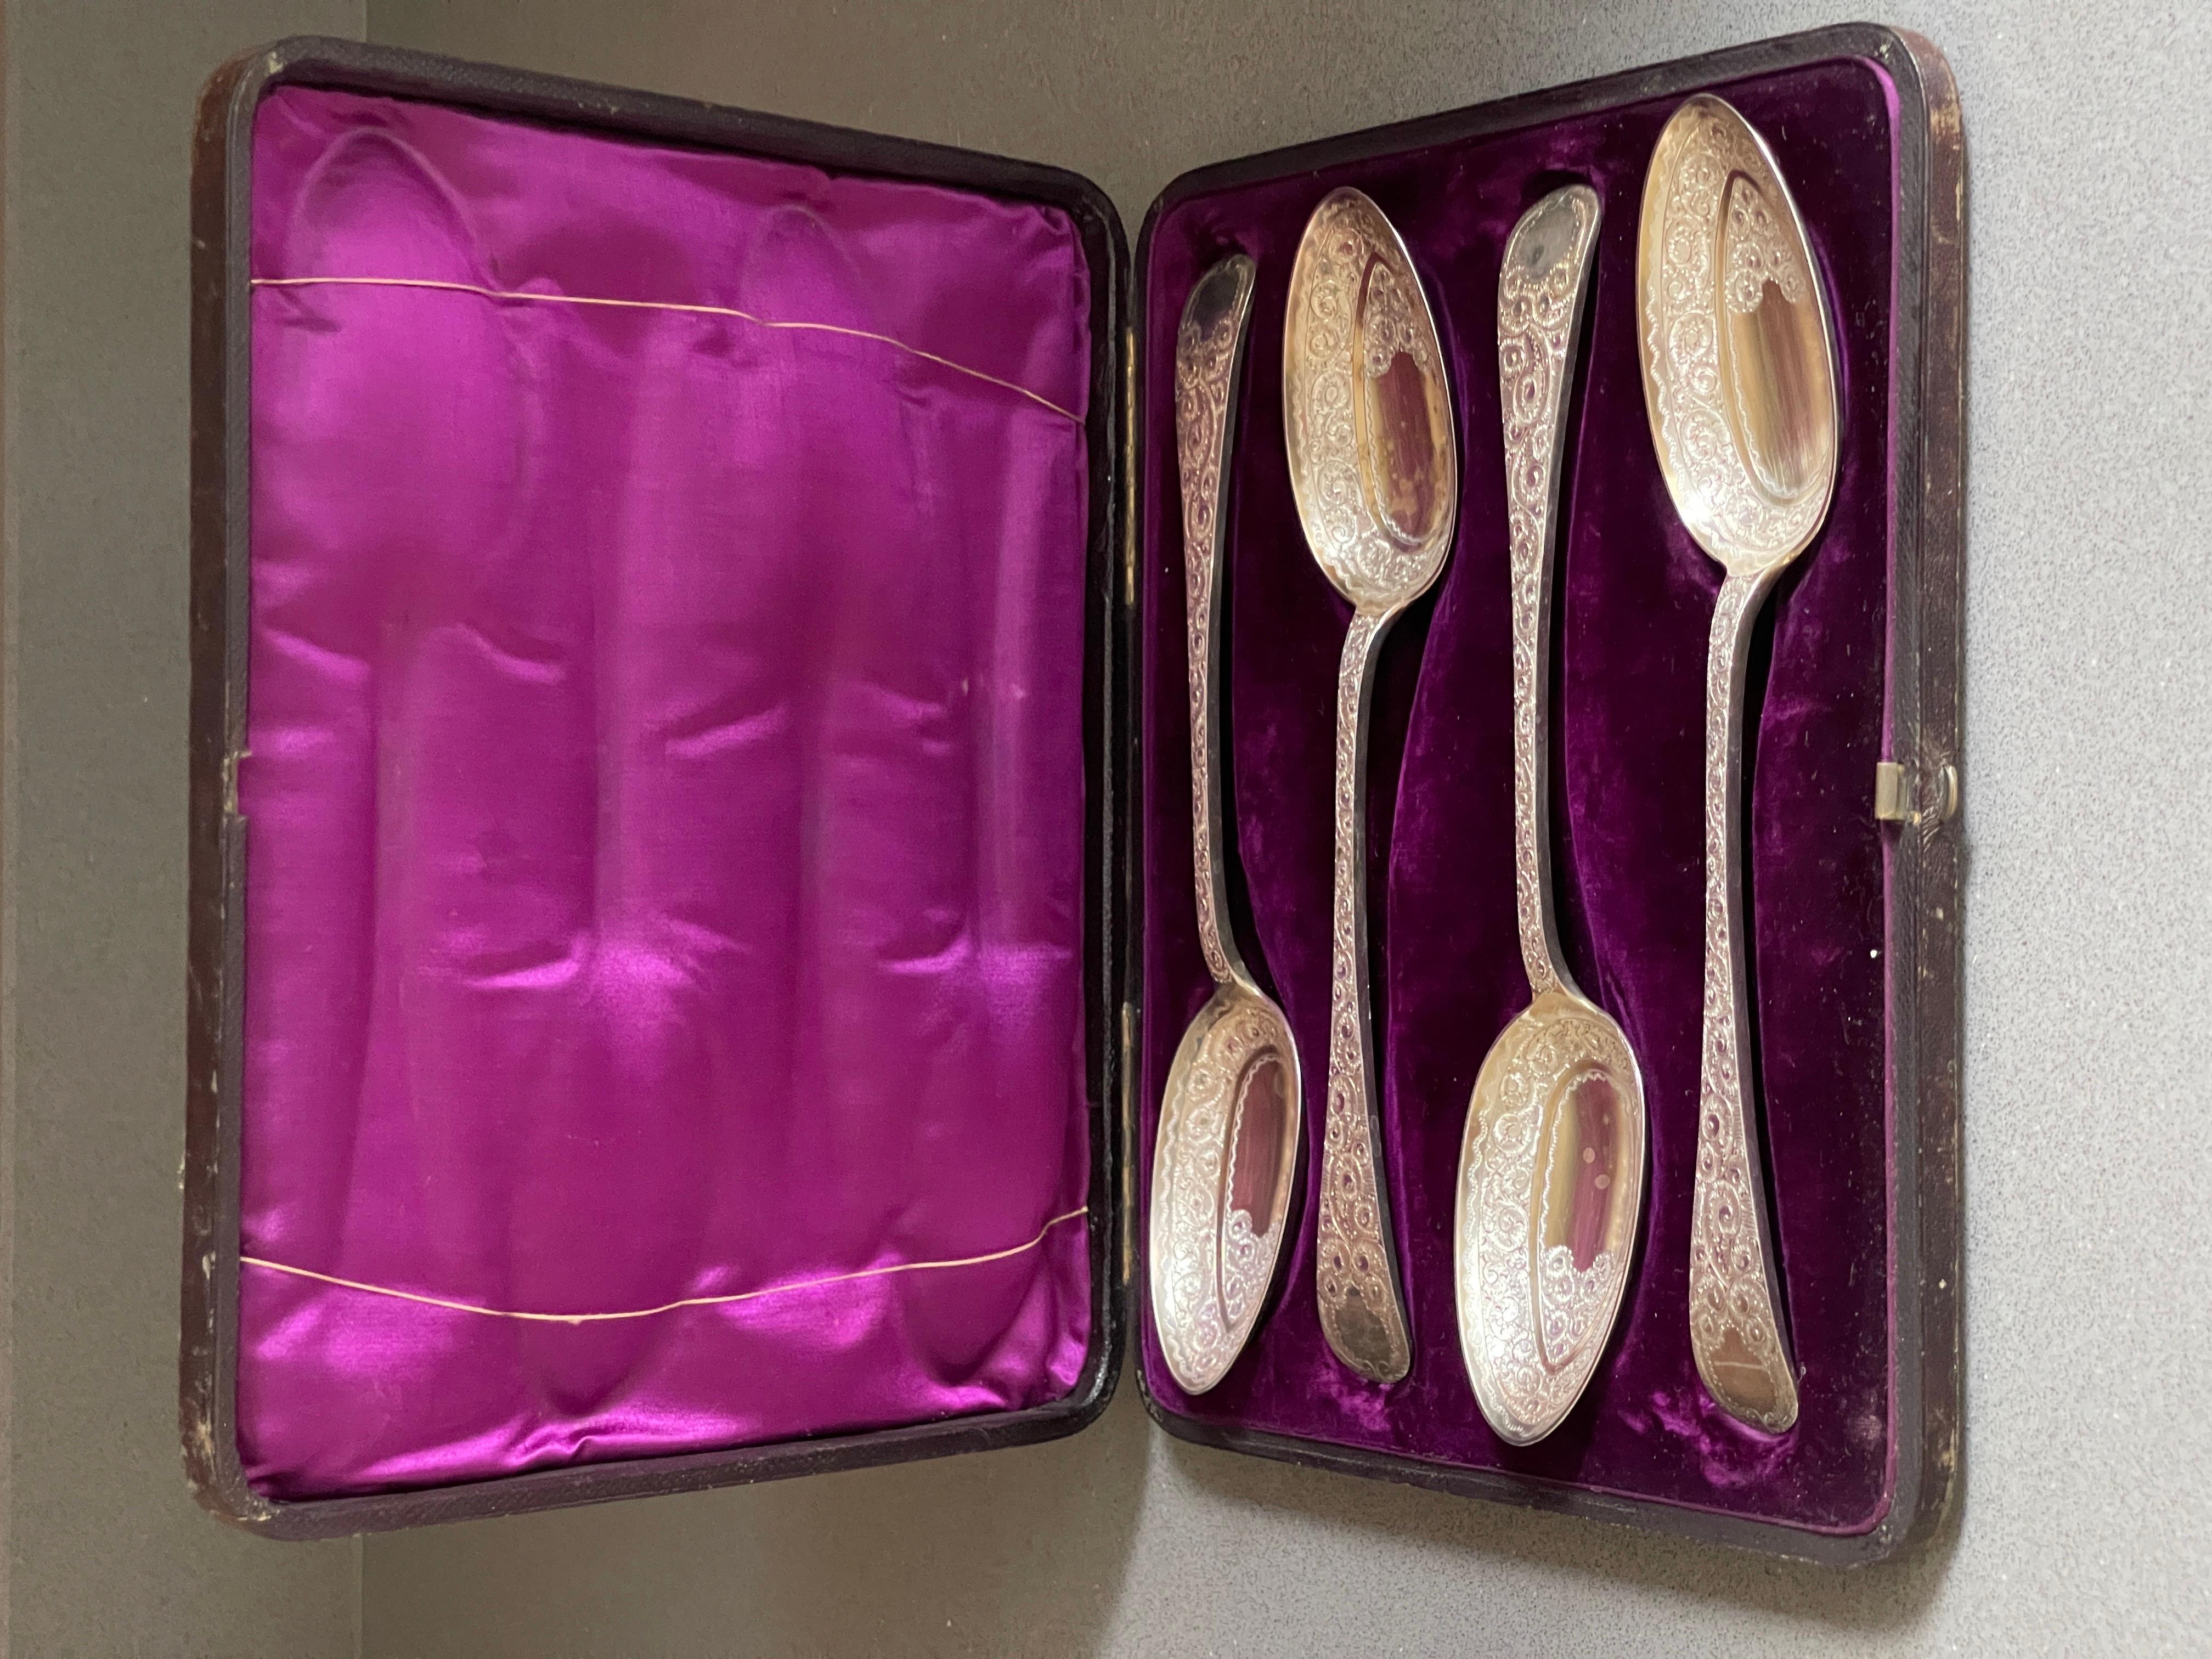 English Exclusive Silver SPOONS, 4 pcs. Antique Silver Dinner Spoon & Box Flat Ware For Sale